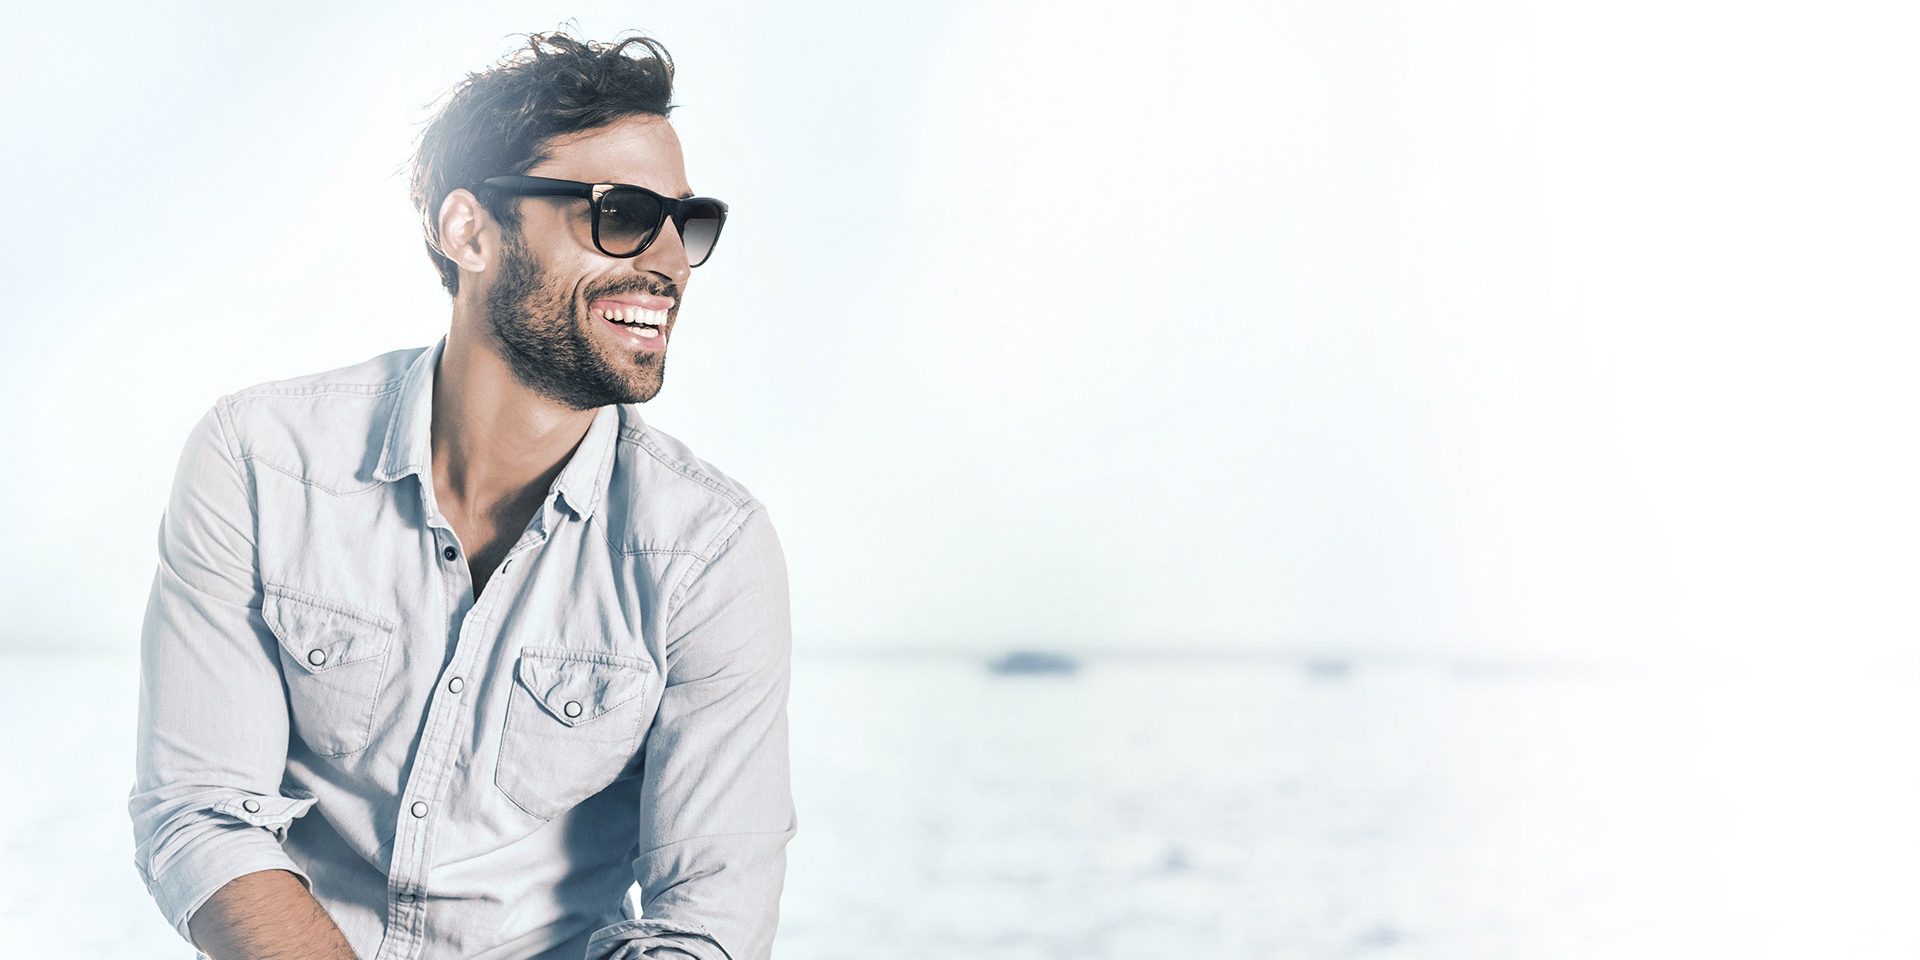 Polarised sunglasses: Comfortable vision without distracting glare.